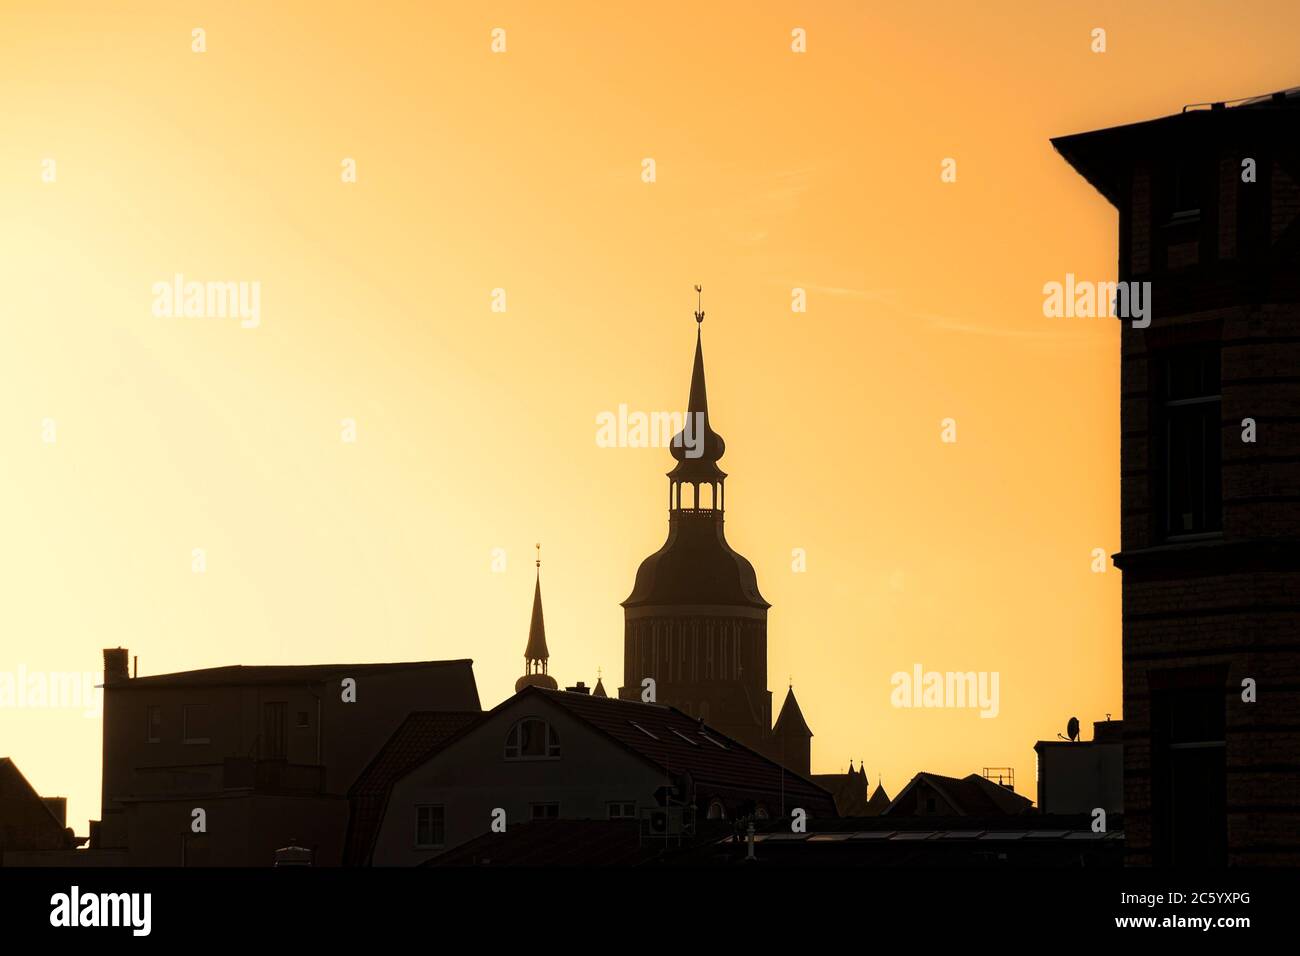 Silhouette of St. Mary´s Church, Hanseatic City Stralsund, Germany, in the evening light of the sinking sun. Stock Photo